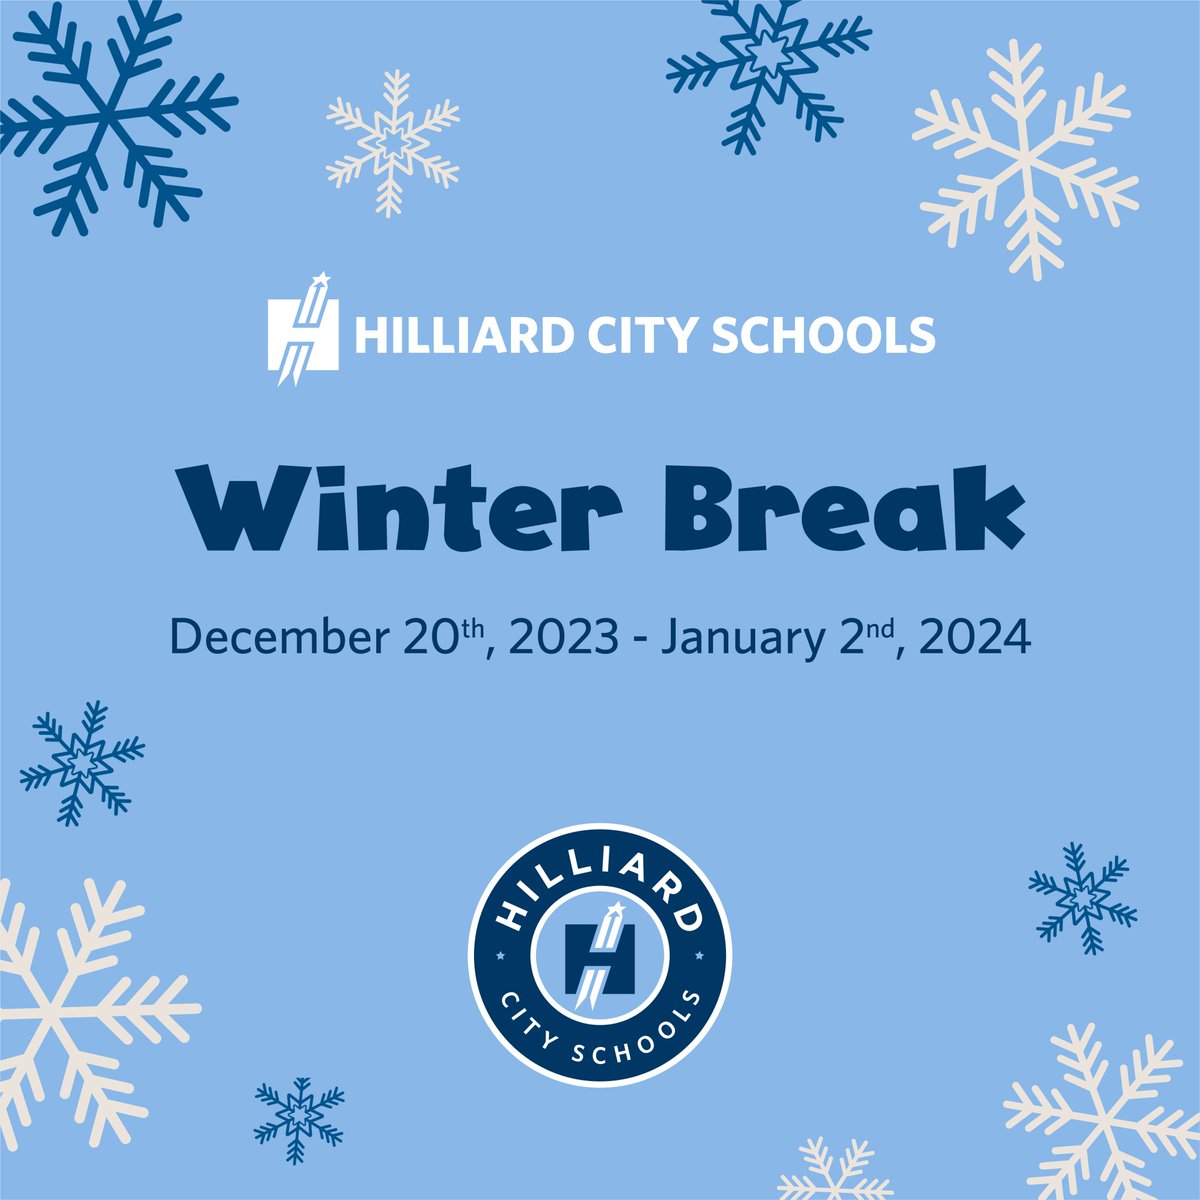 Today, December 19, is the last day of classes before Winter break. We hope everyone has a safe and wonderful break. We look forward to seeing everyone back on January 3, 2024!